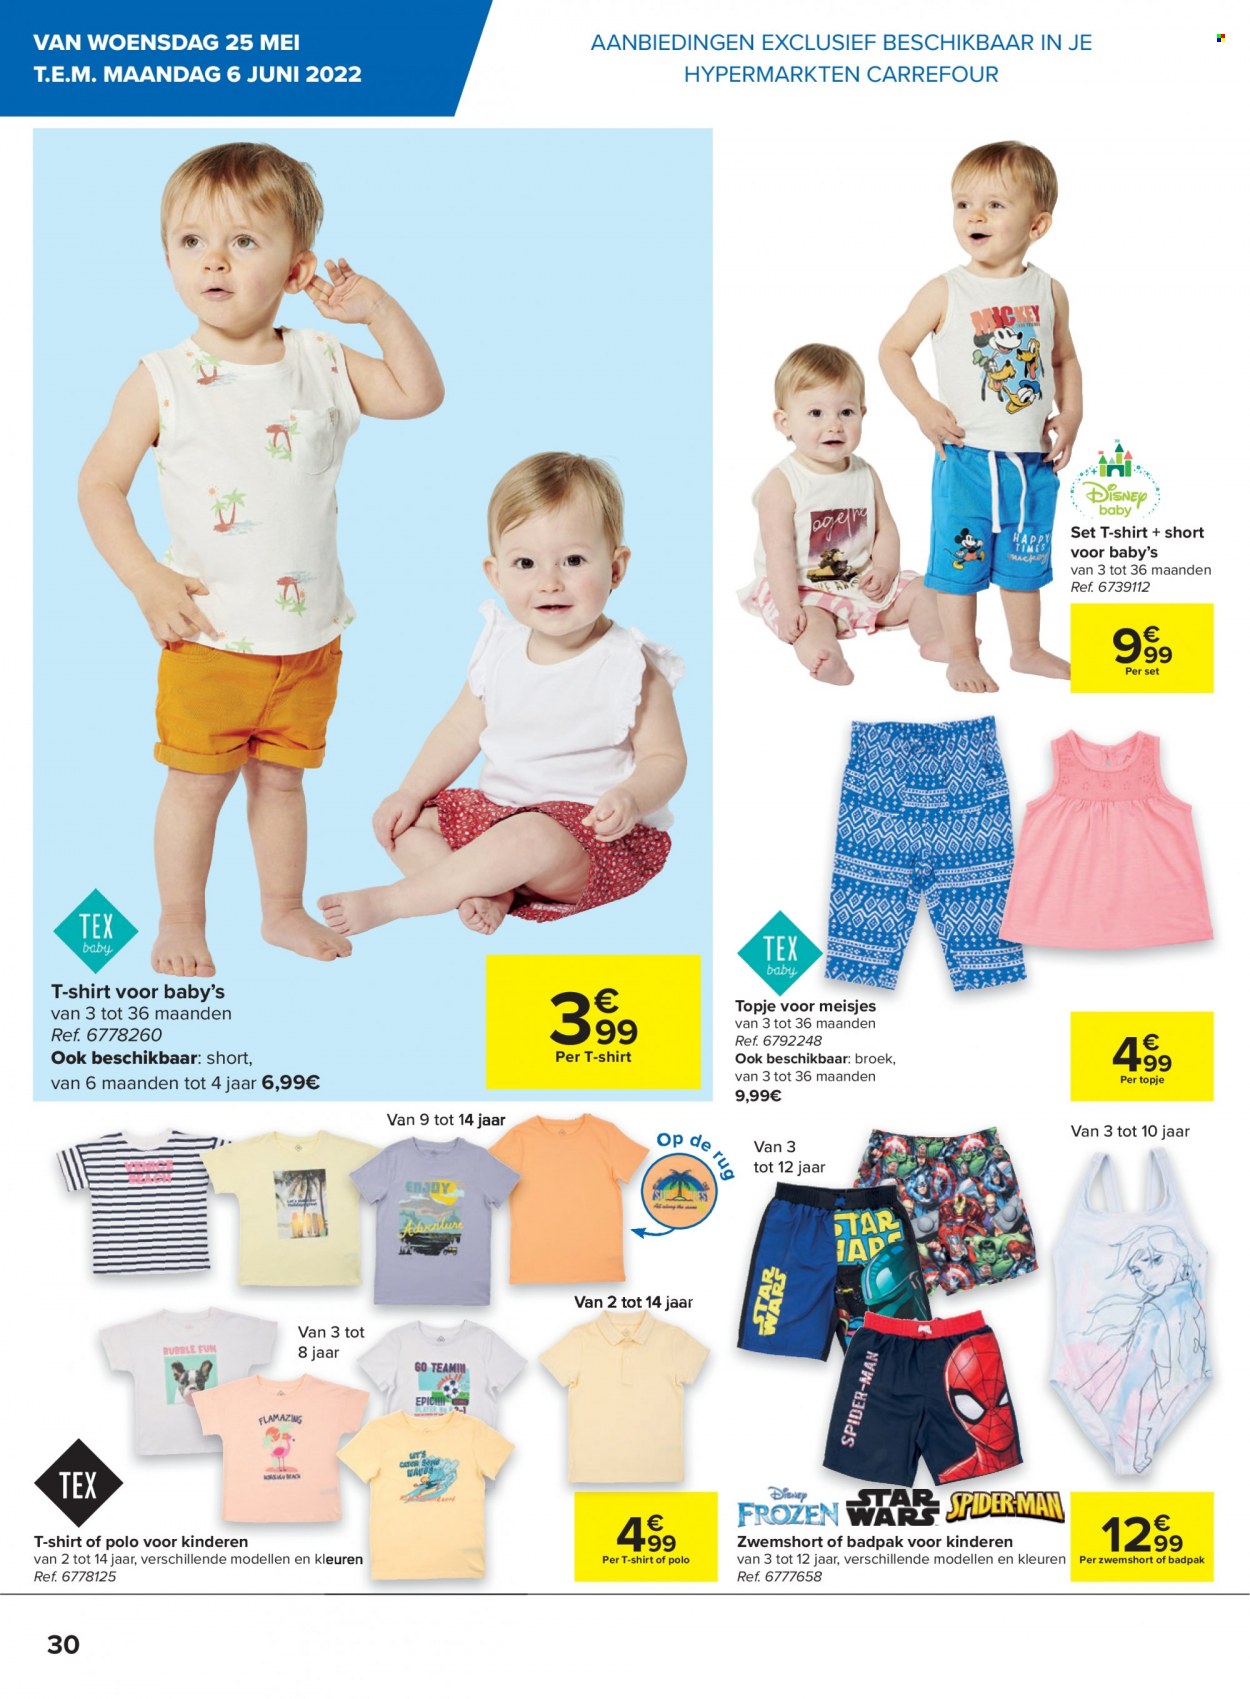 Catalogue Carrefour hypermarkt - 24.5.2022 - 30.5.2022. Page 30.